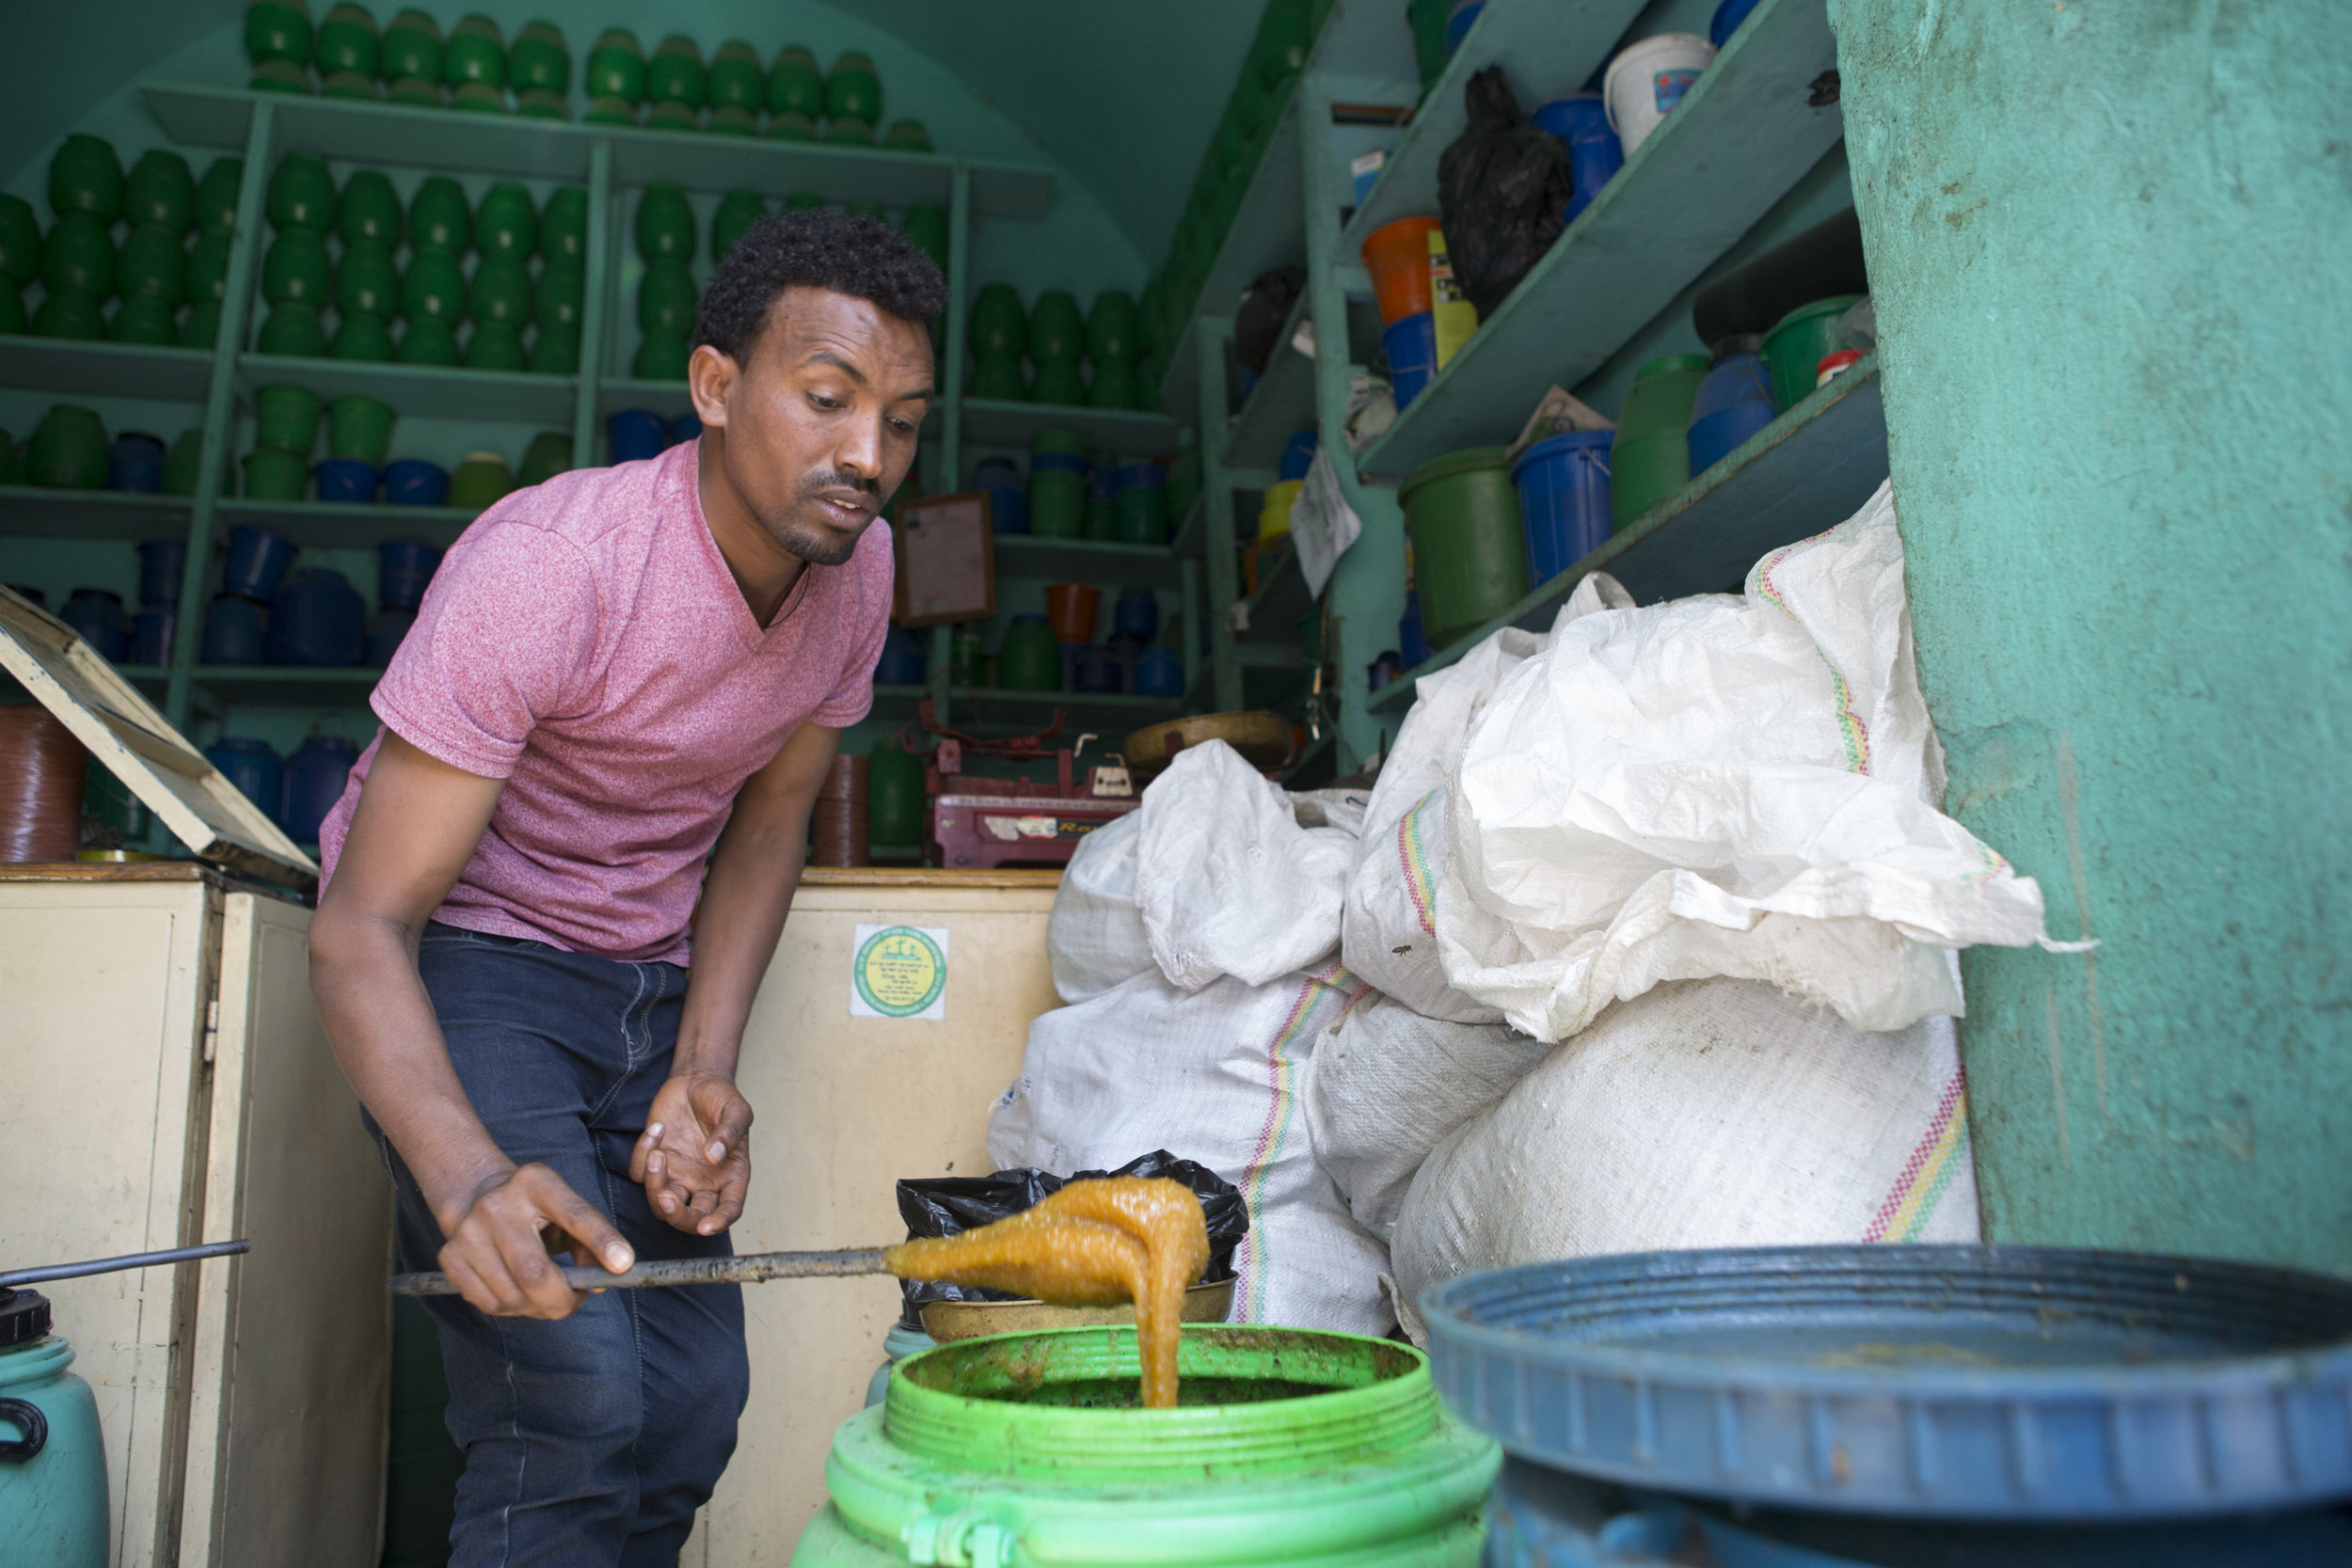  Haile Gebru, honey shop keeper, in Mekelle in the Tigray region of northern Ethiopia, is pictured on 30 March 2017, preparing honey to be sold to some customers. Tigray is well known for producing honey, though not enough for Ethiopia to make it a m